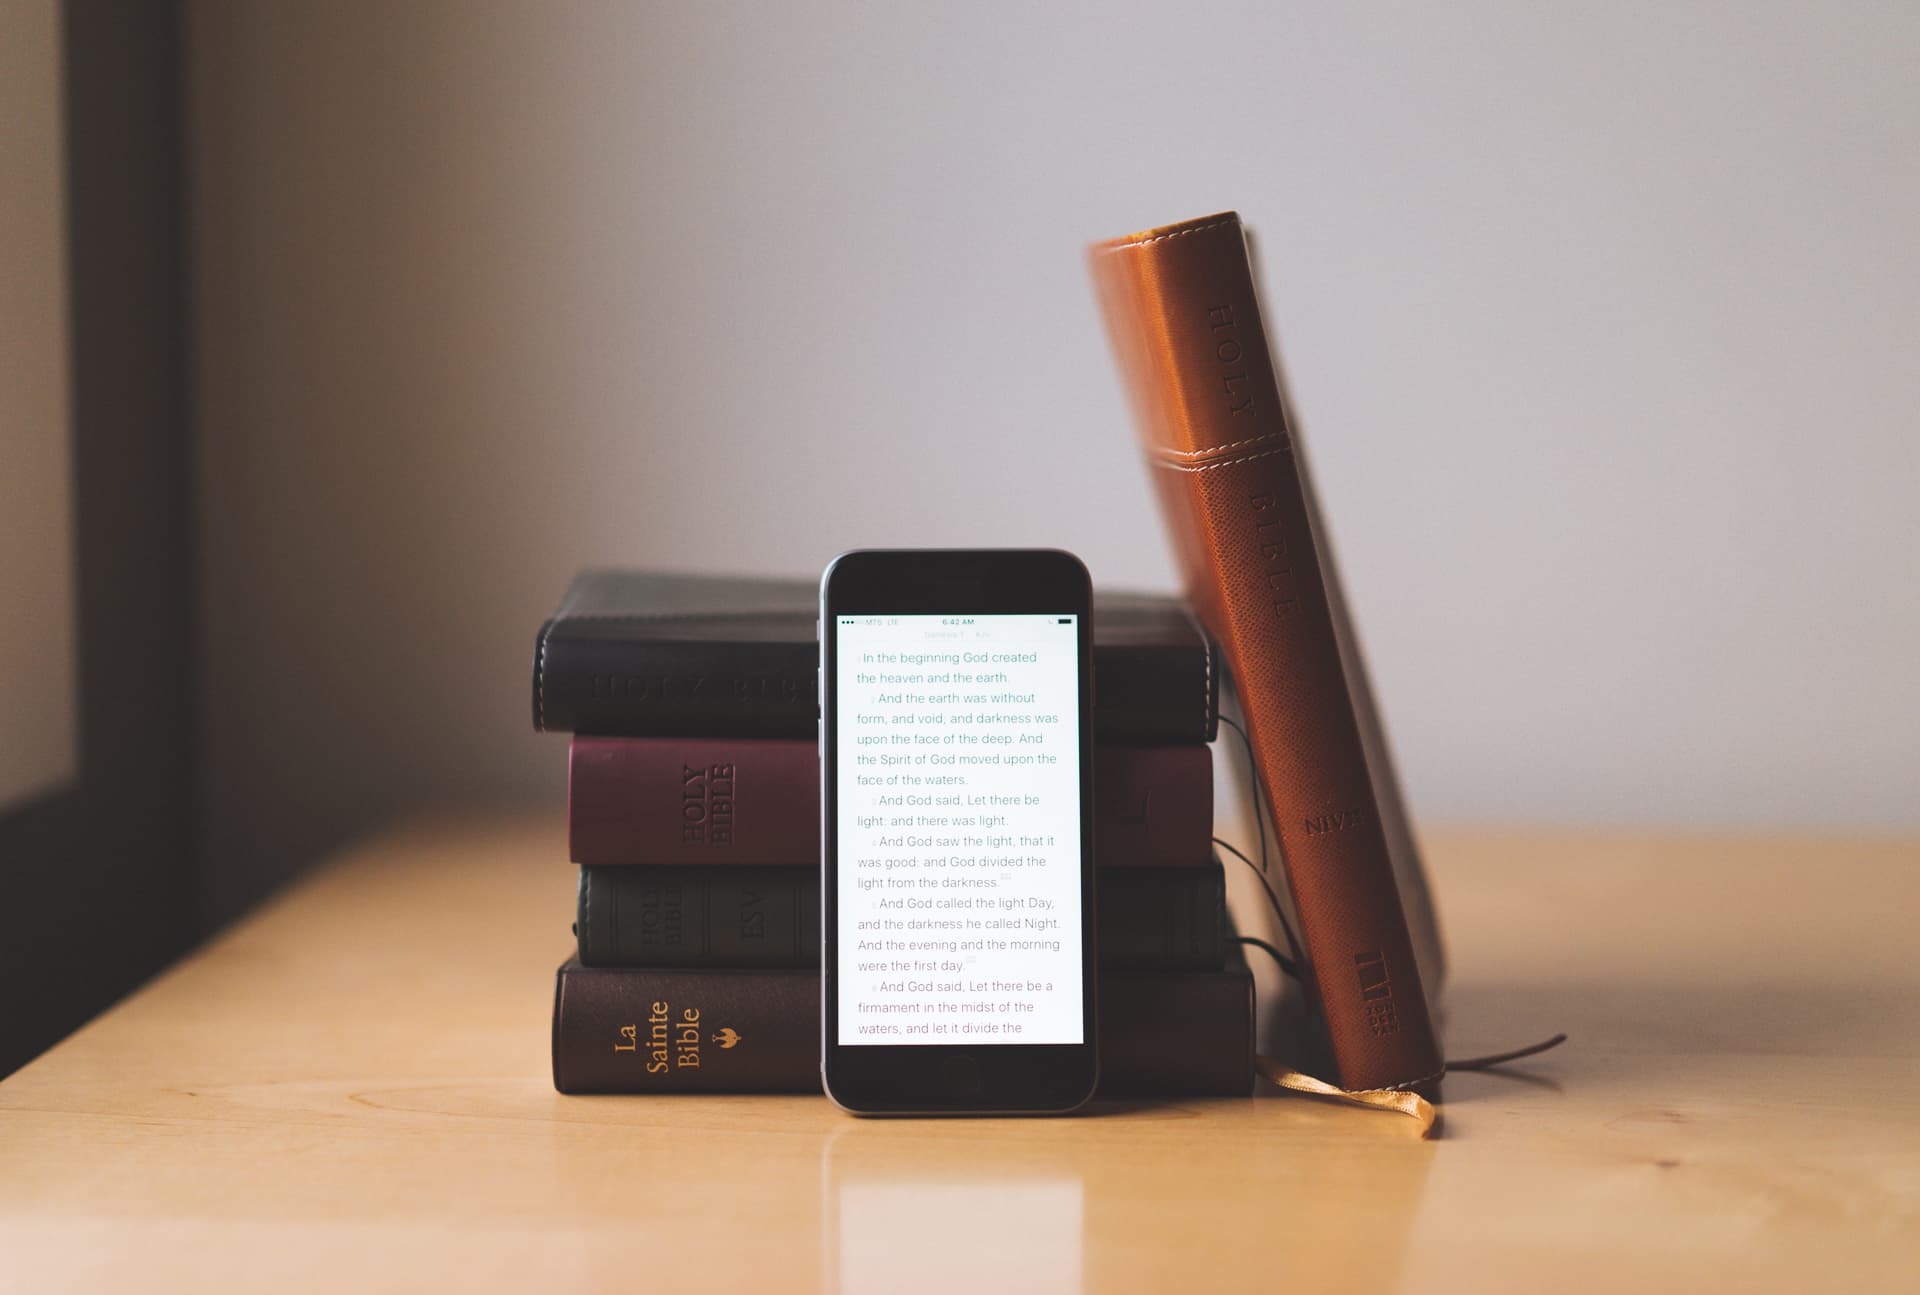 The best Bible app for iOS